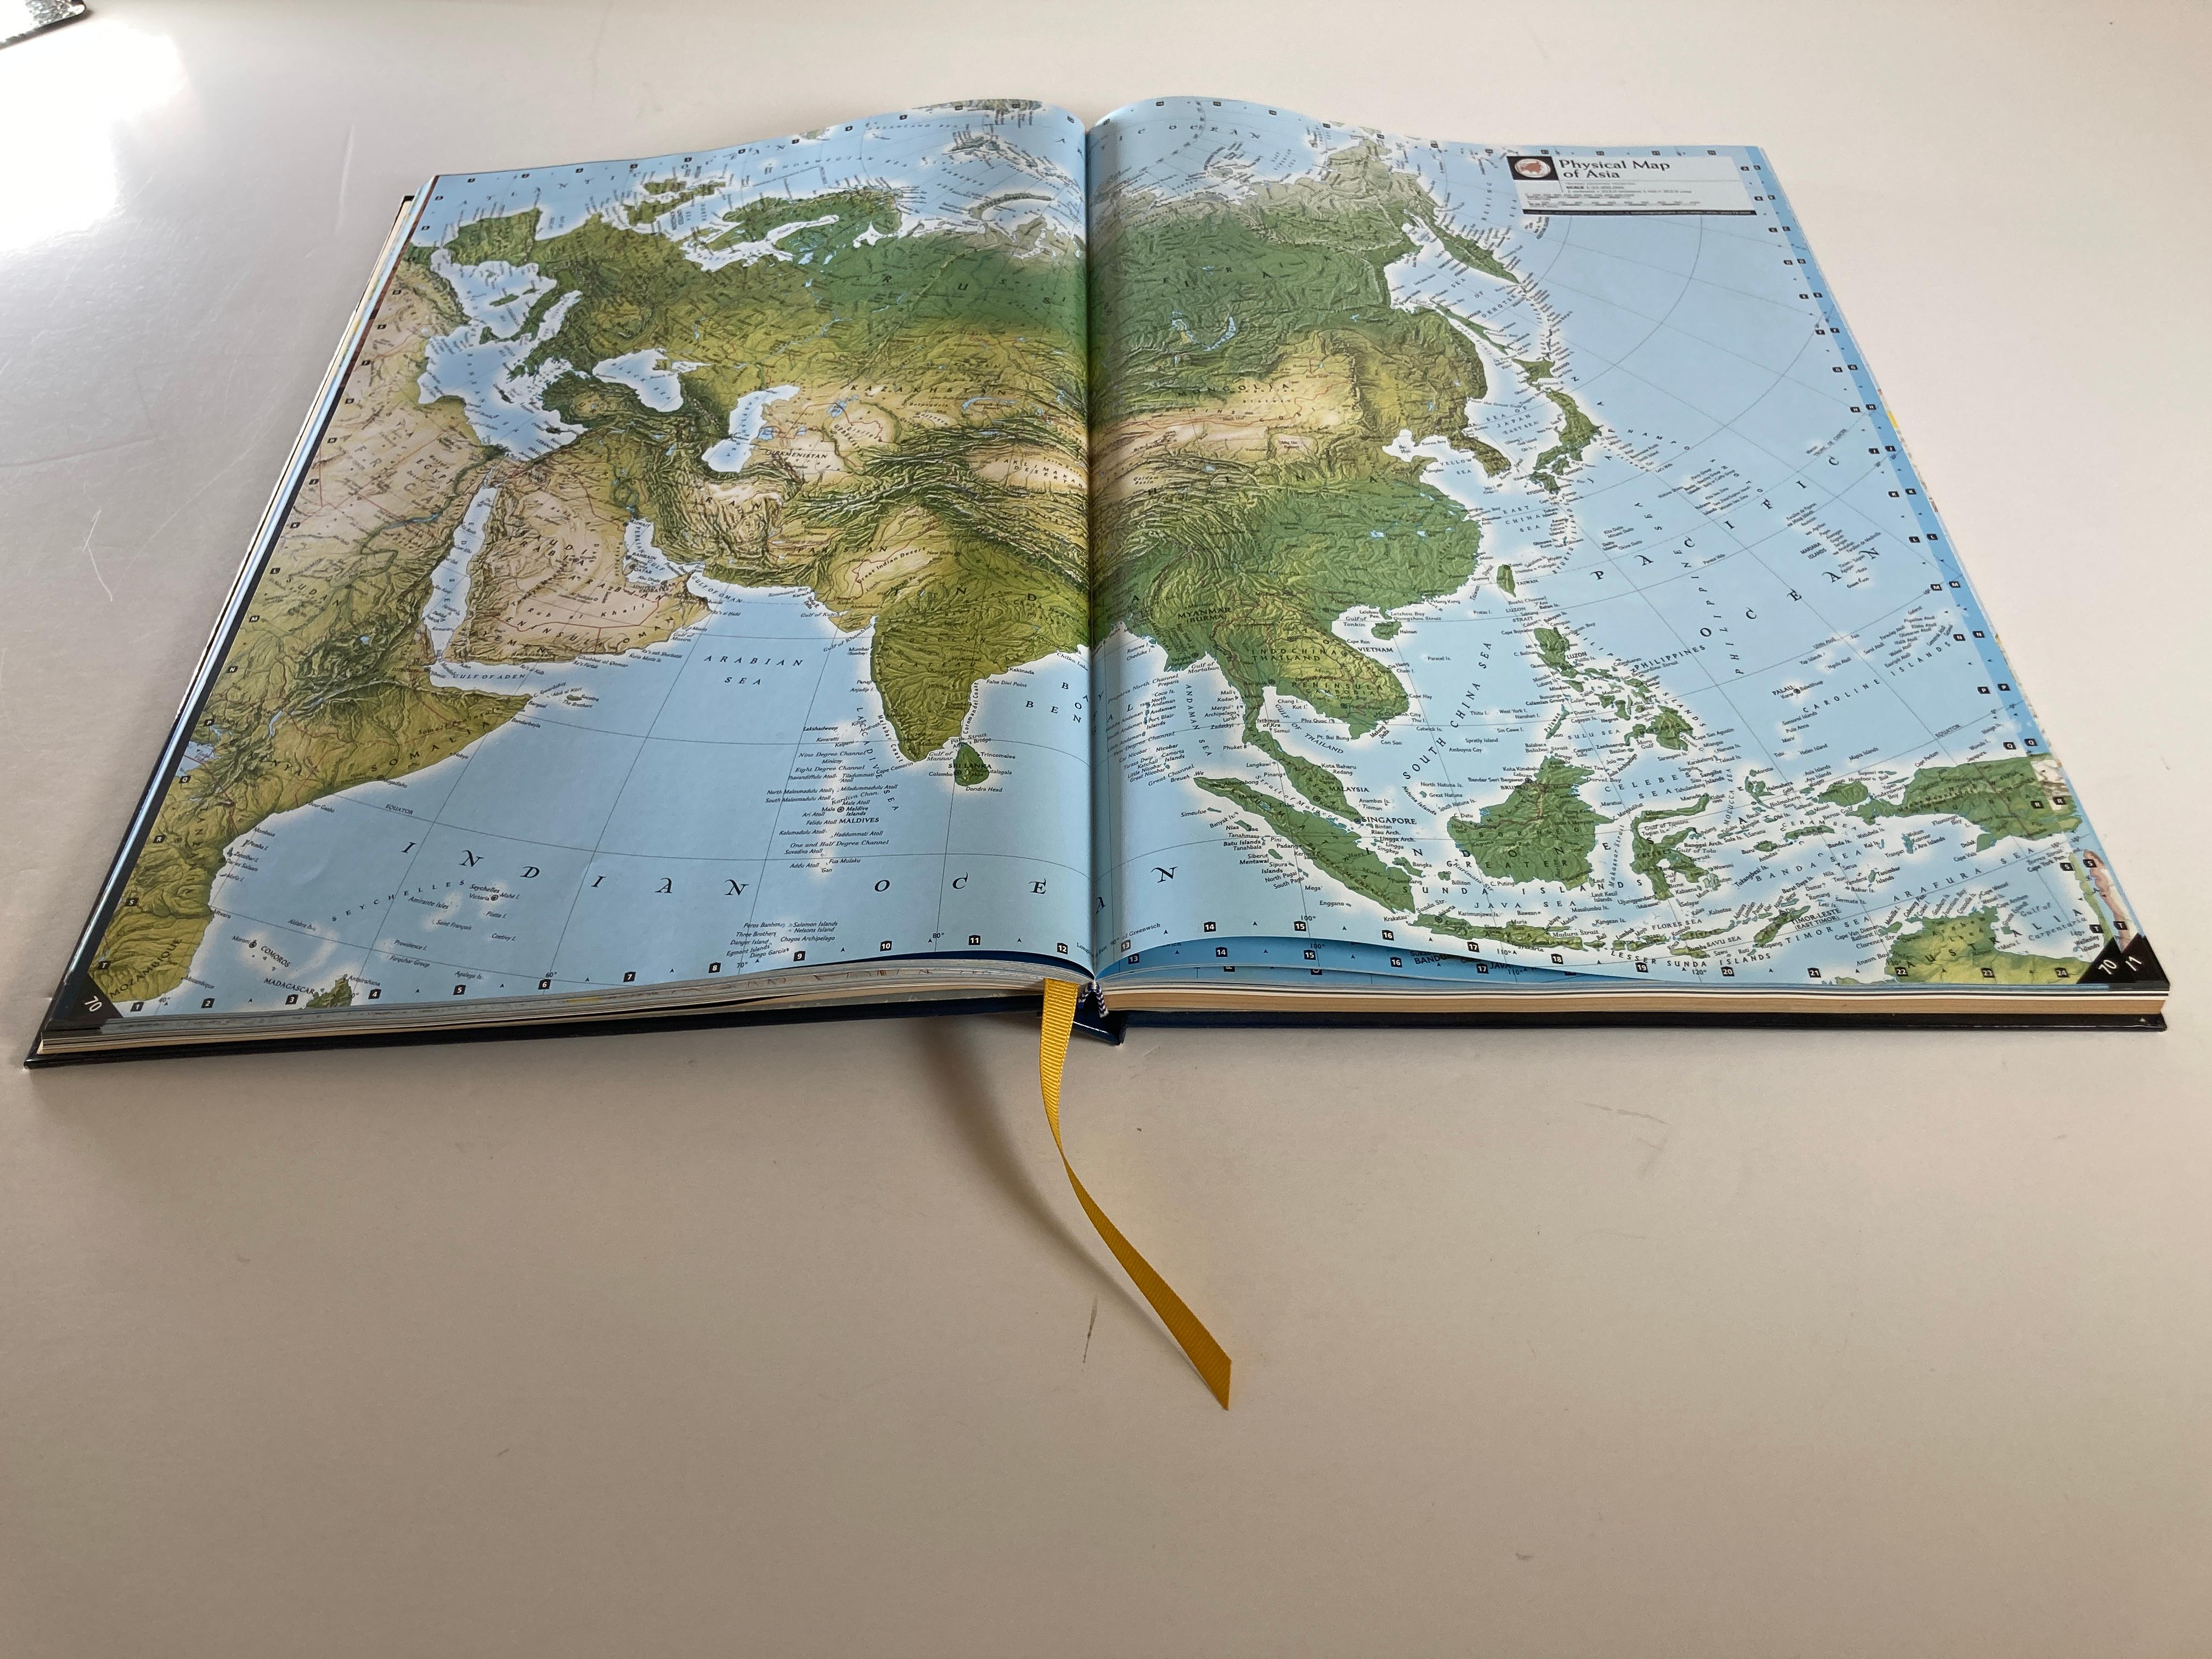 Maltese National Geographic Atlas of the World, Eighth Edition Hardcover Book For Sale